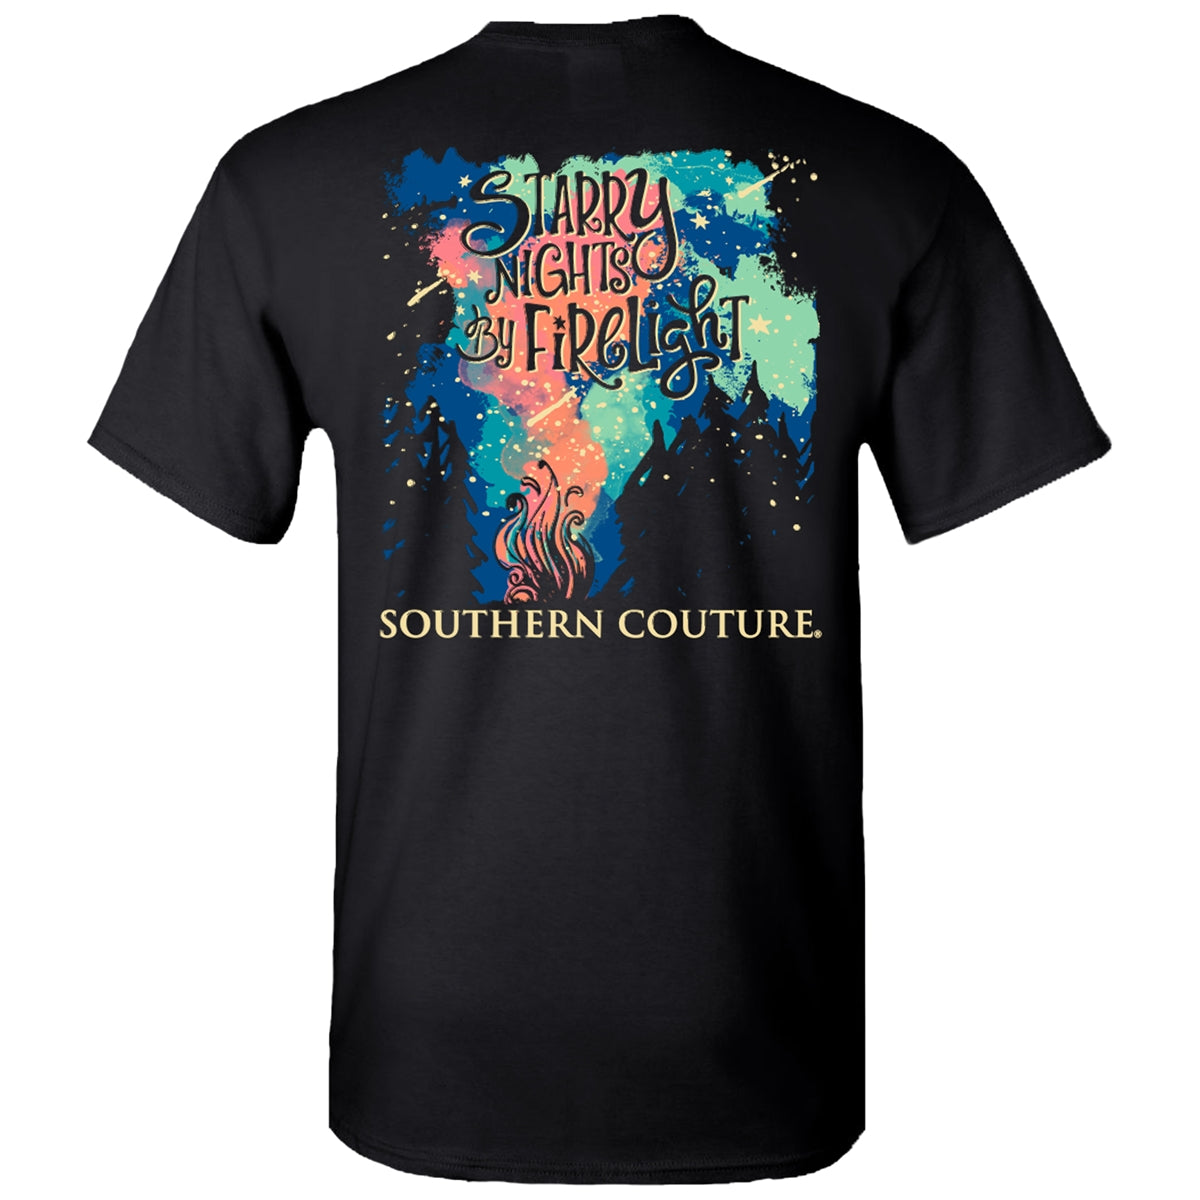 Southern Couture Classic Starry Nights by Firelight T-Shirt